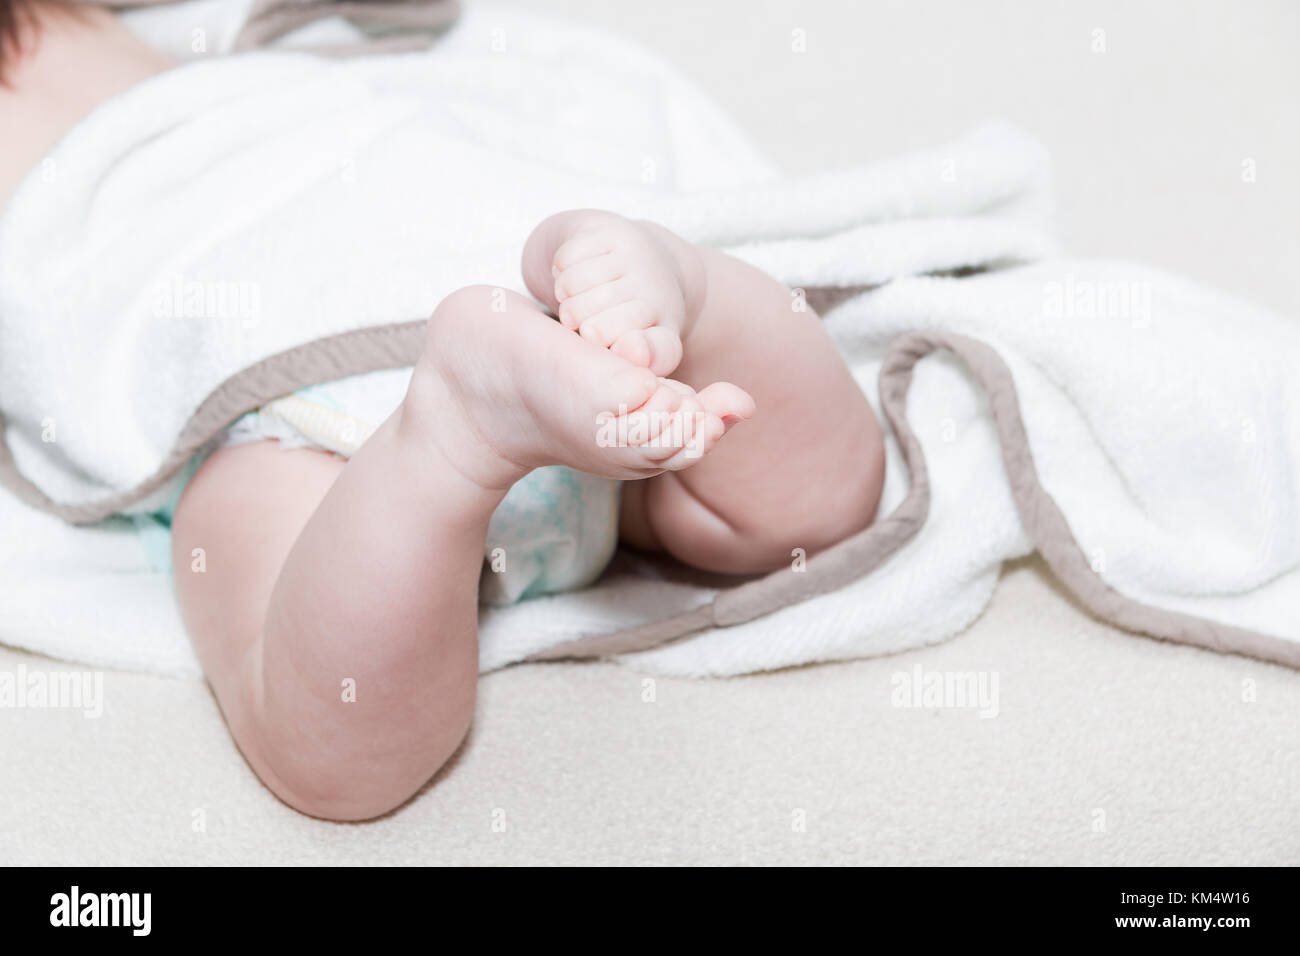 White towel around cute newborn feet. Close up picture of new born baby feet on a white sheet. Stock Photo